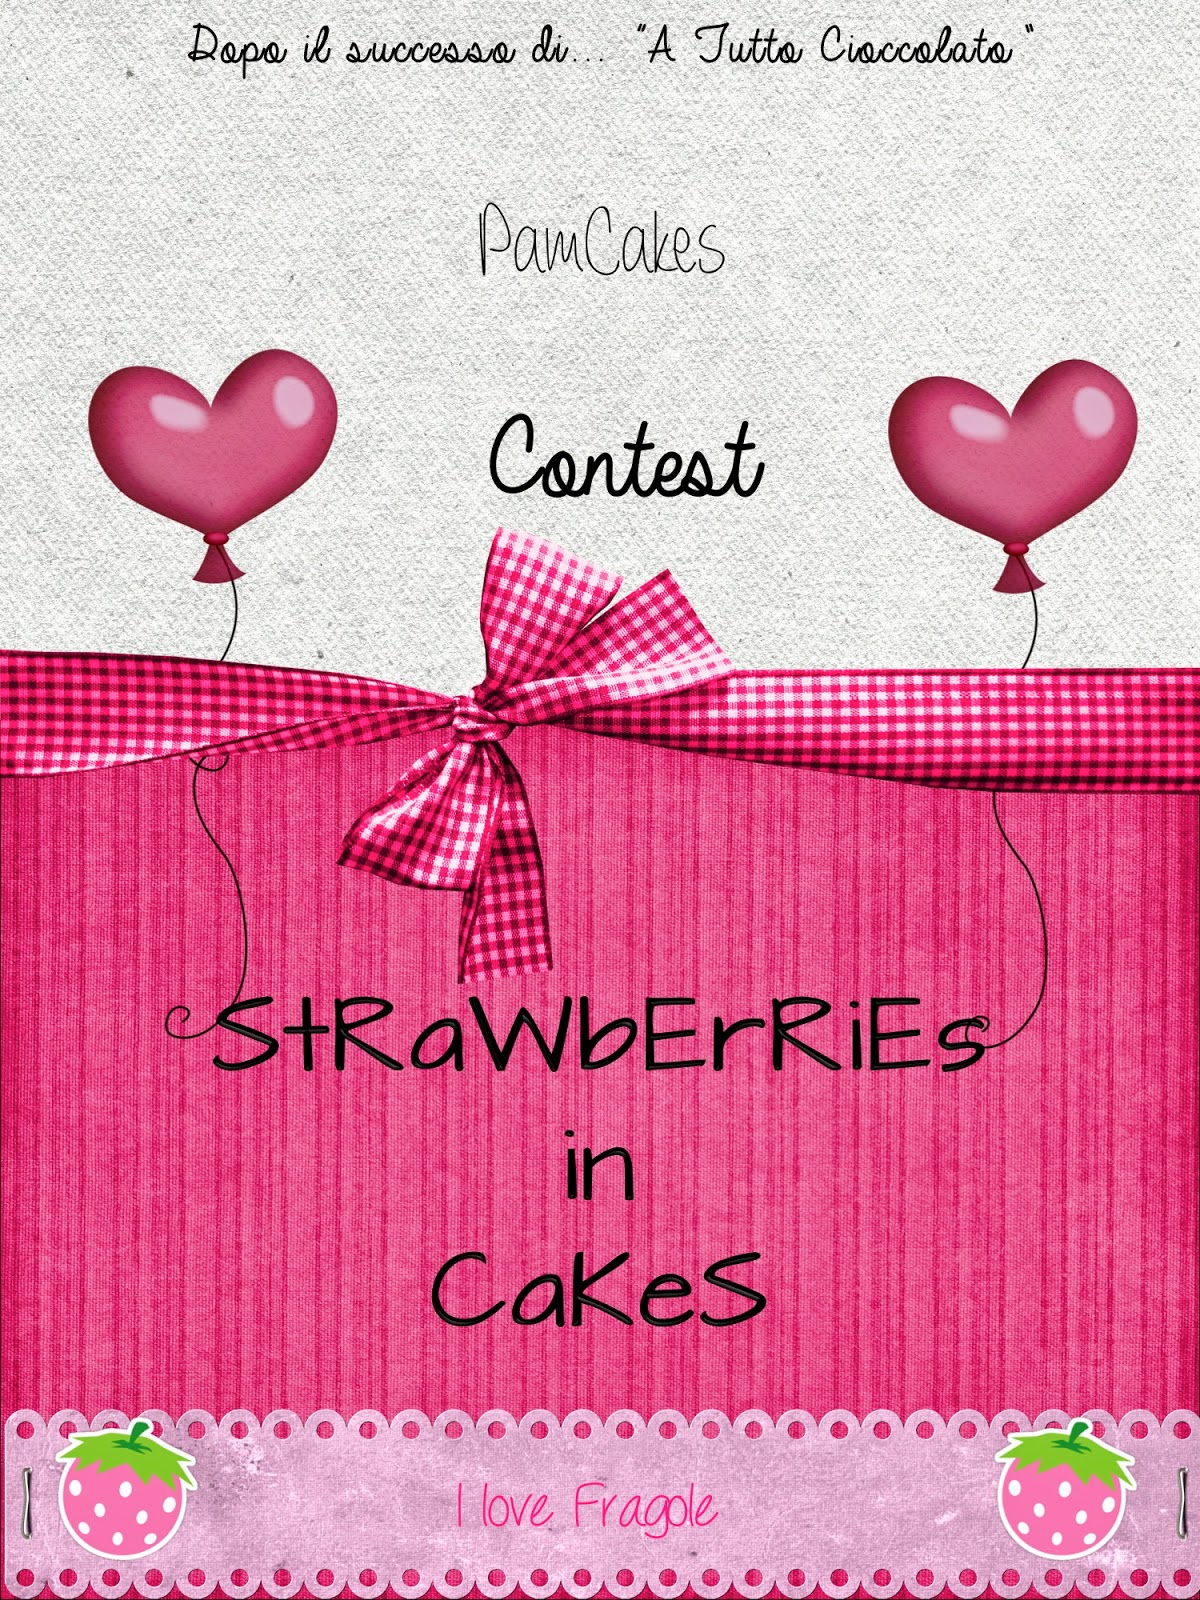 http://pamcakes83blog.blogspot.it/2014/05/contest-strawberries-in-cakes.html